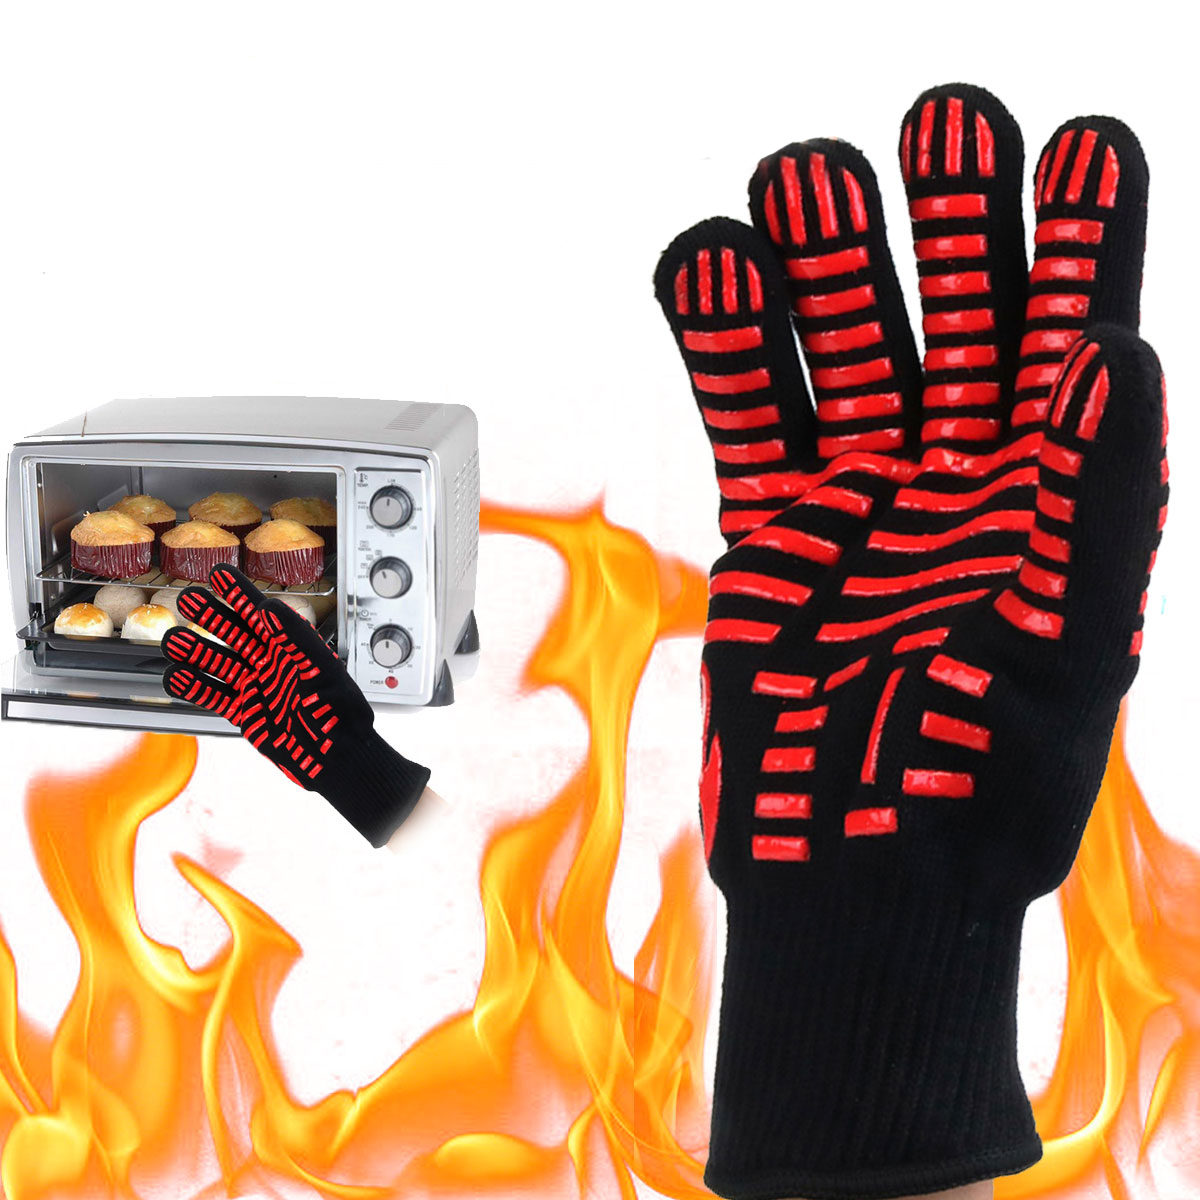 2pcs of BBQ Grill Glove 500 Extreme Heat Resistant Gloves Cooking Baking Gloves Camping Picnic